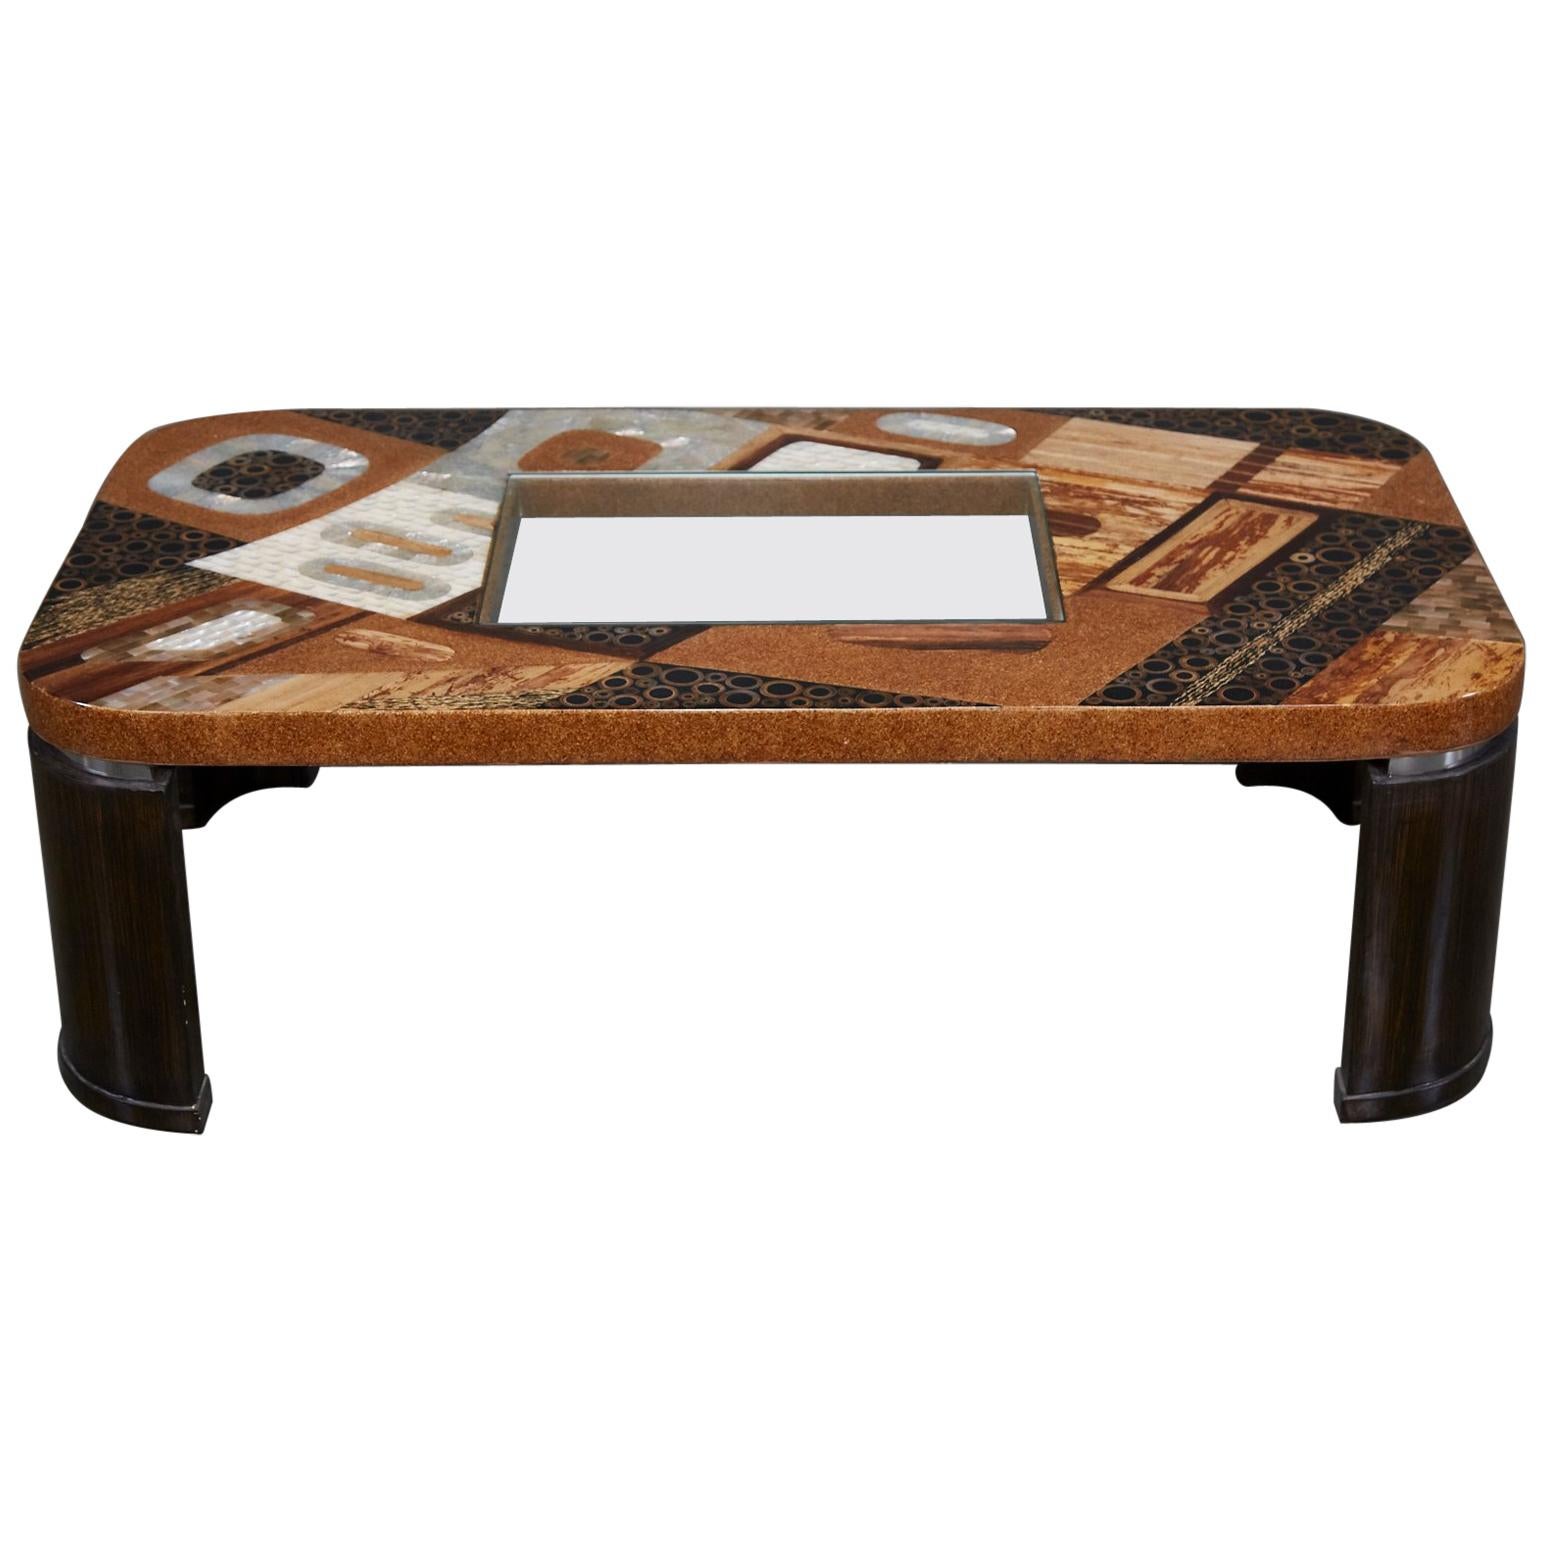 "Lifestyle" Coffee Table with Exotic Natural Inlay and Glass Insert, 1990s For Sale